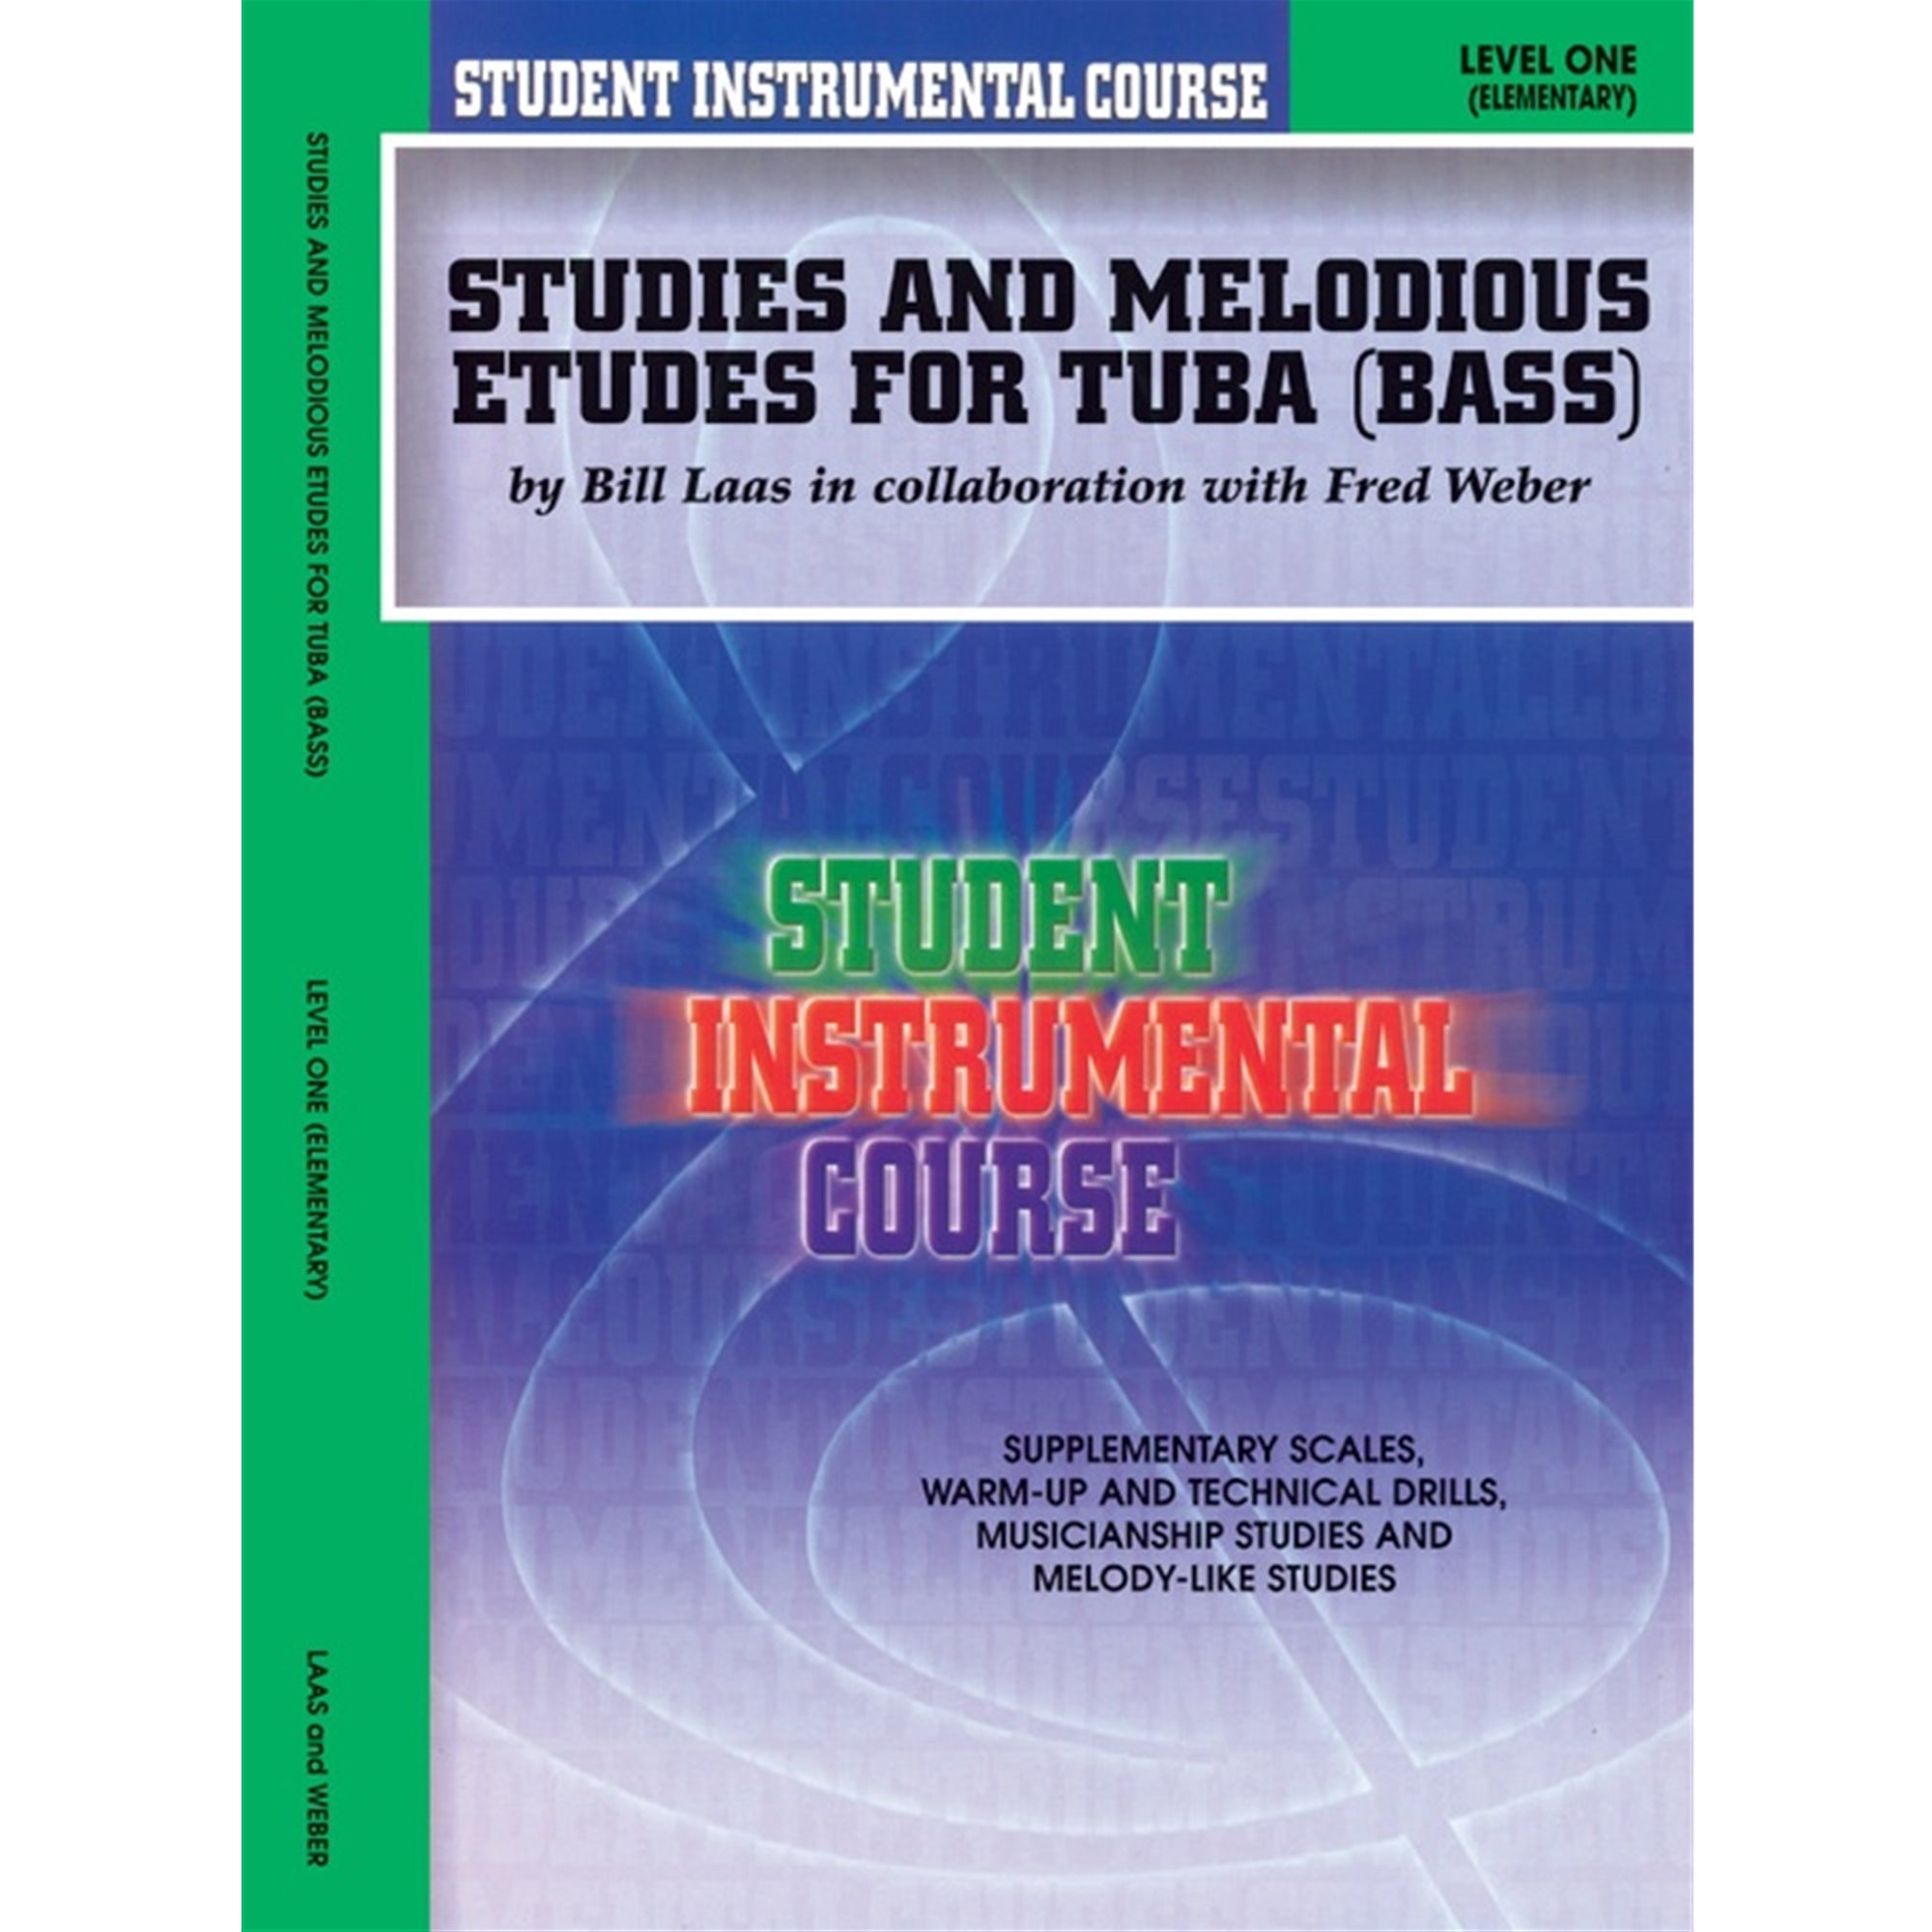 Alfred Publishi BIC00167A Student Instrumental Course: Studies and Melodious Etudes for Tuba, Level I